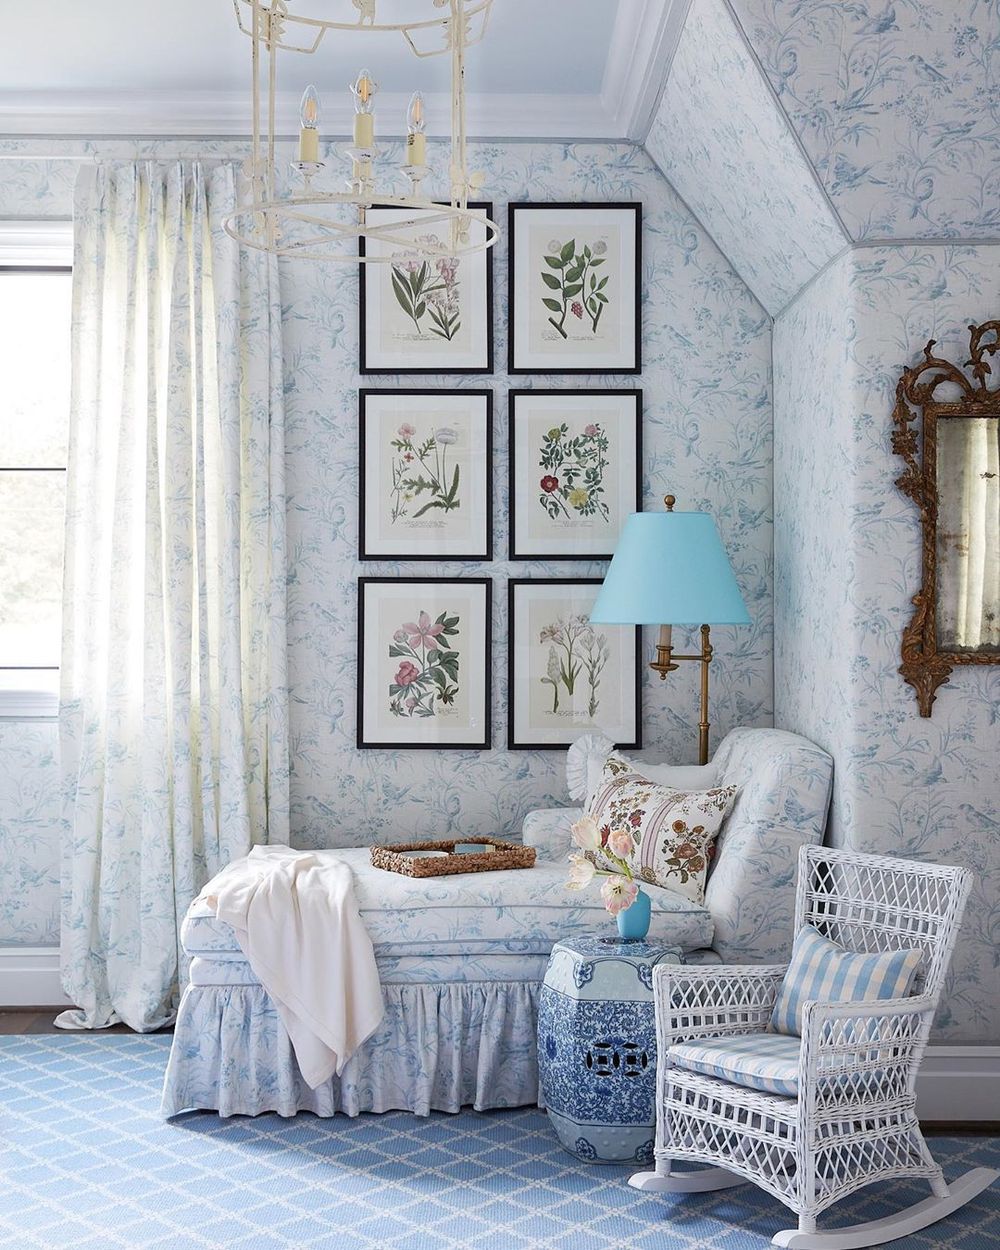 Neo-traditional pattern wallpaper and blue chinoiserie stool via @amylberry